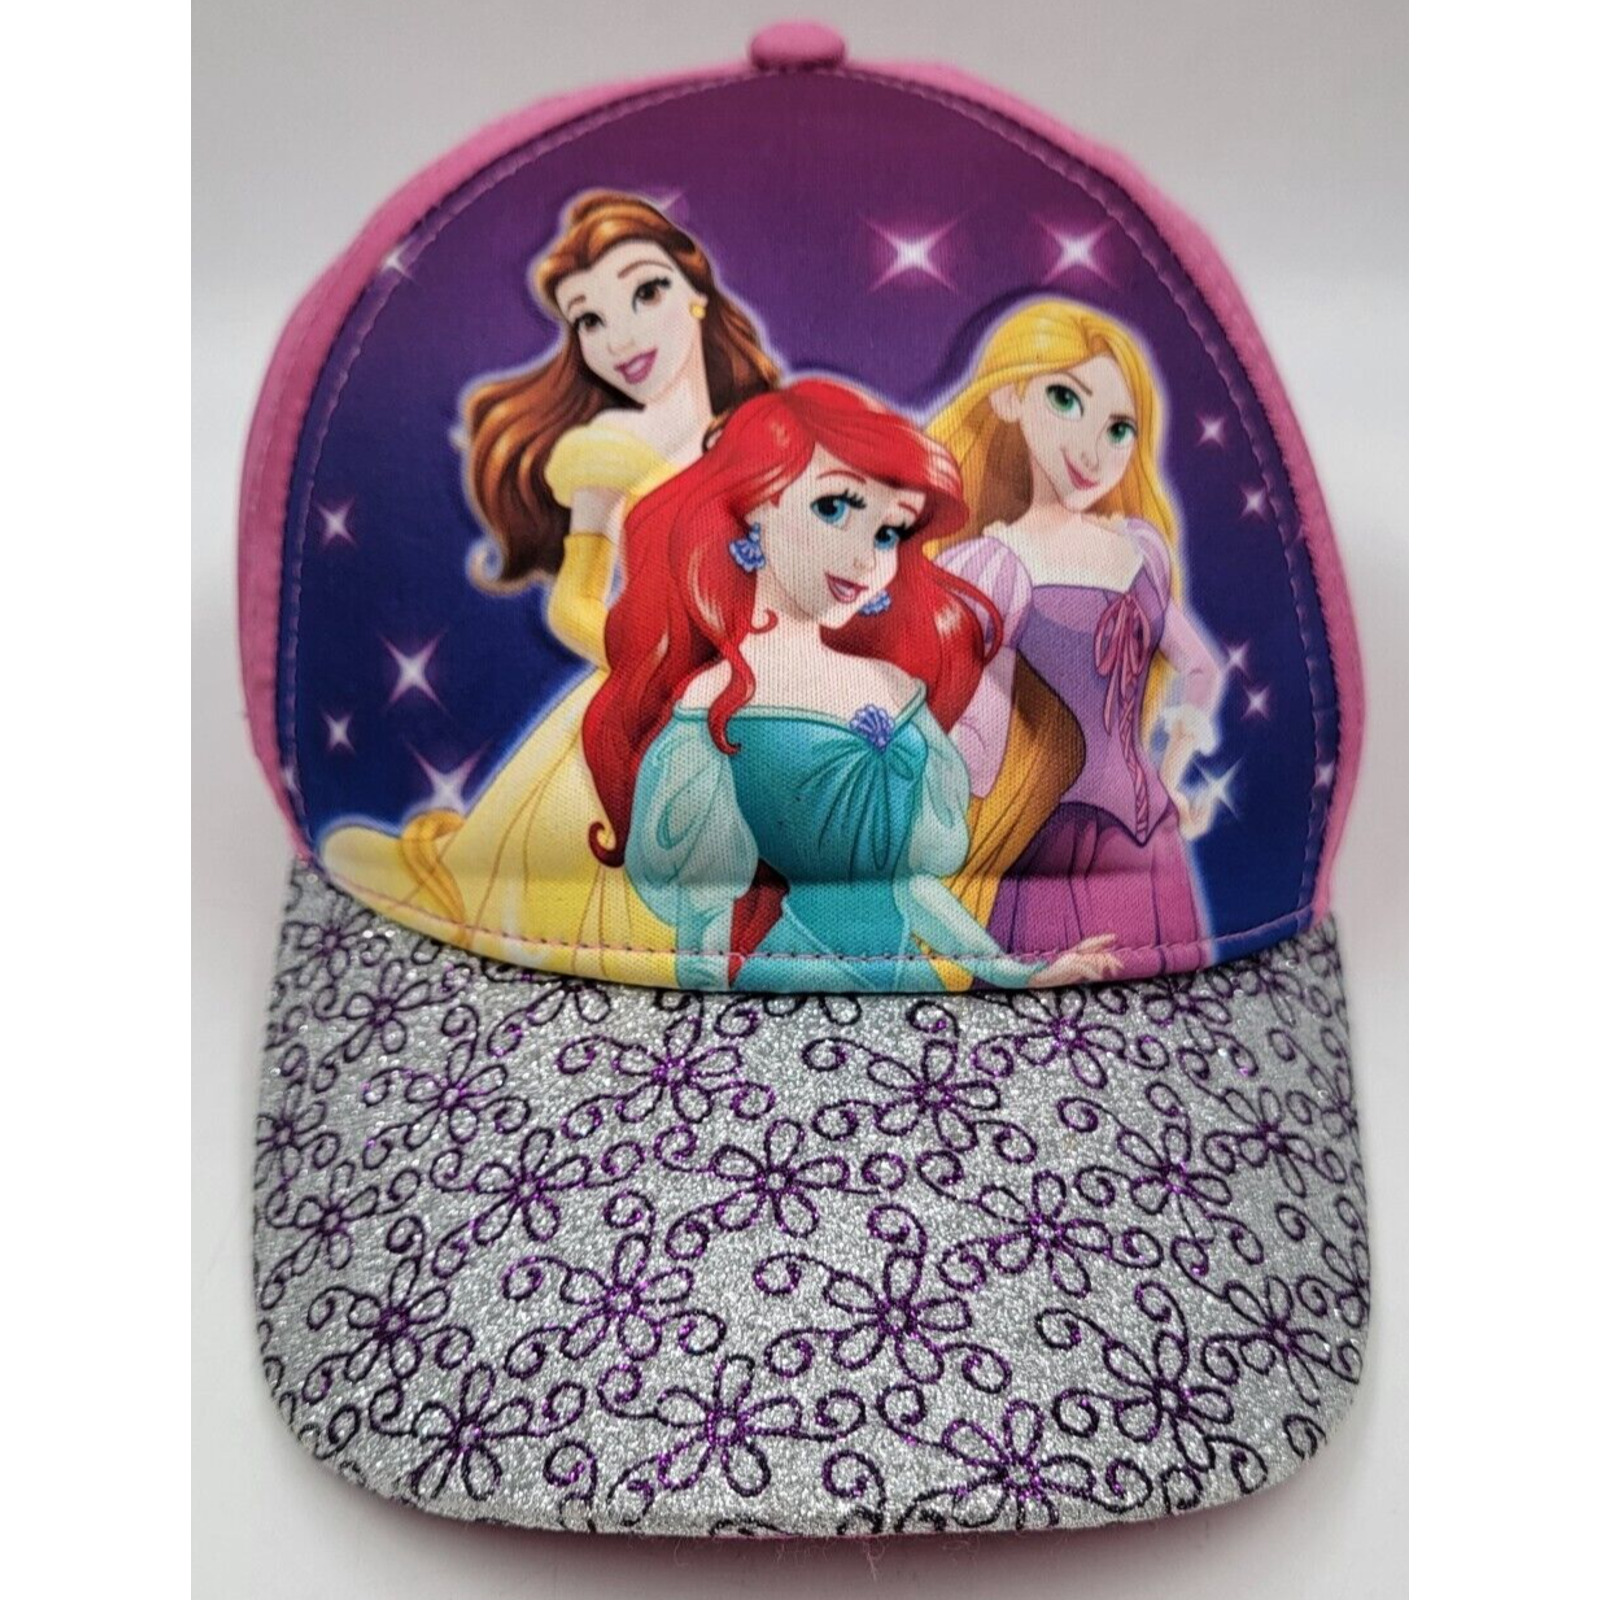 Disney Princess Ball Cap Toddler Pink Sparkly Glitter Believe in Yourself Hat